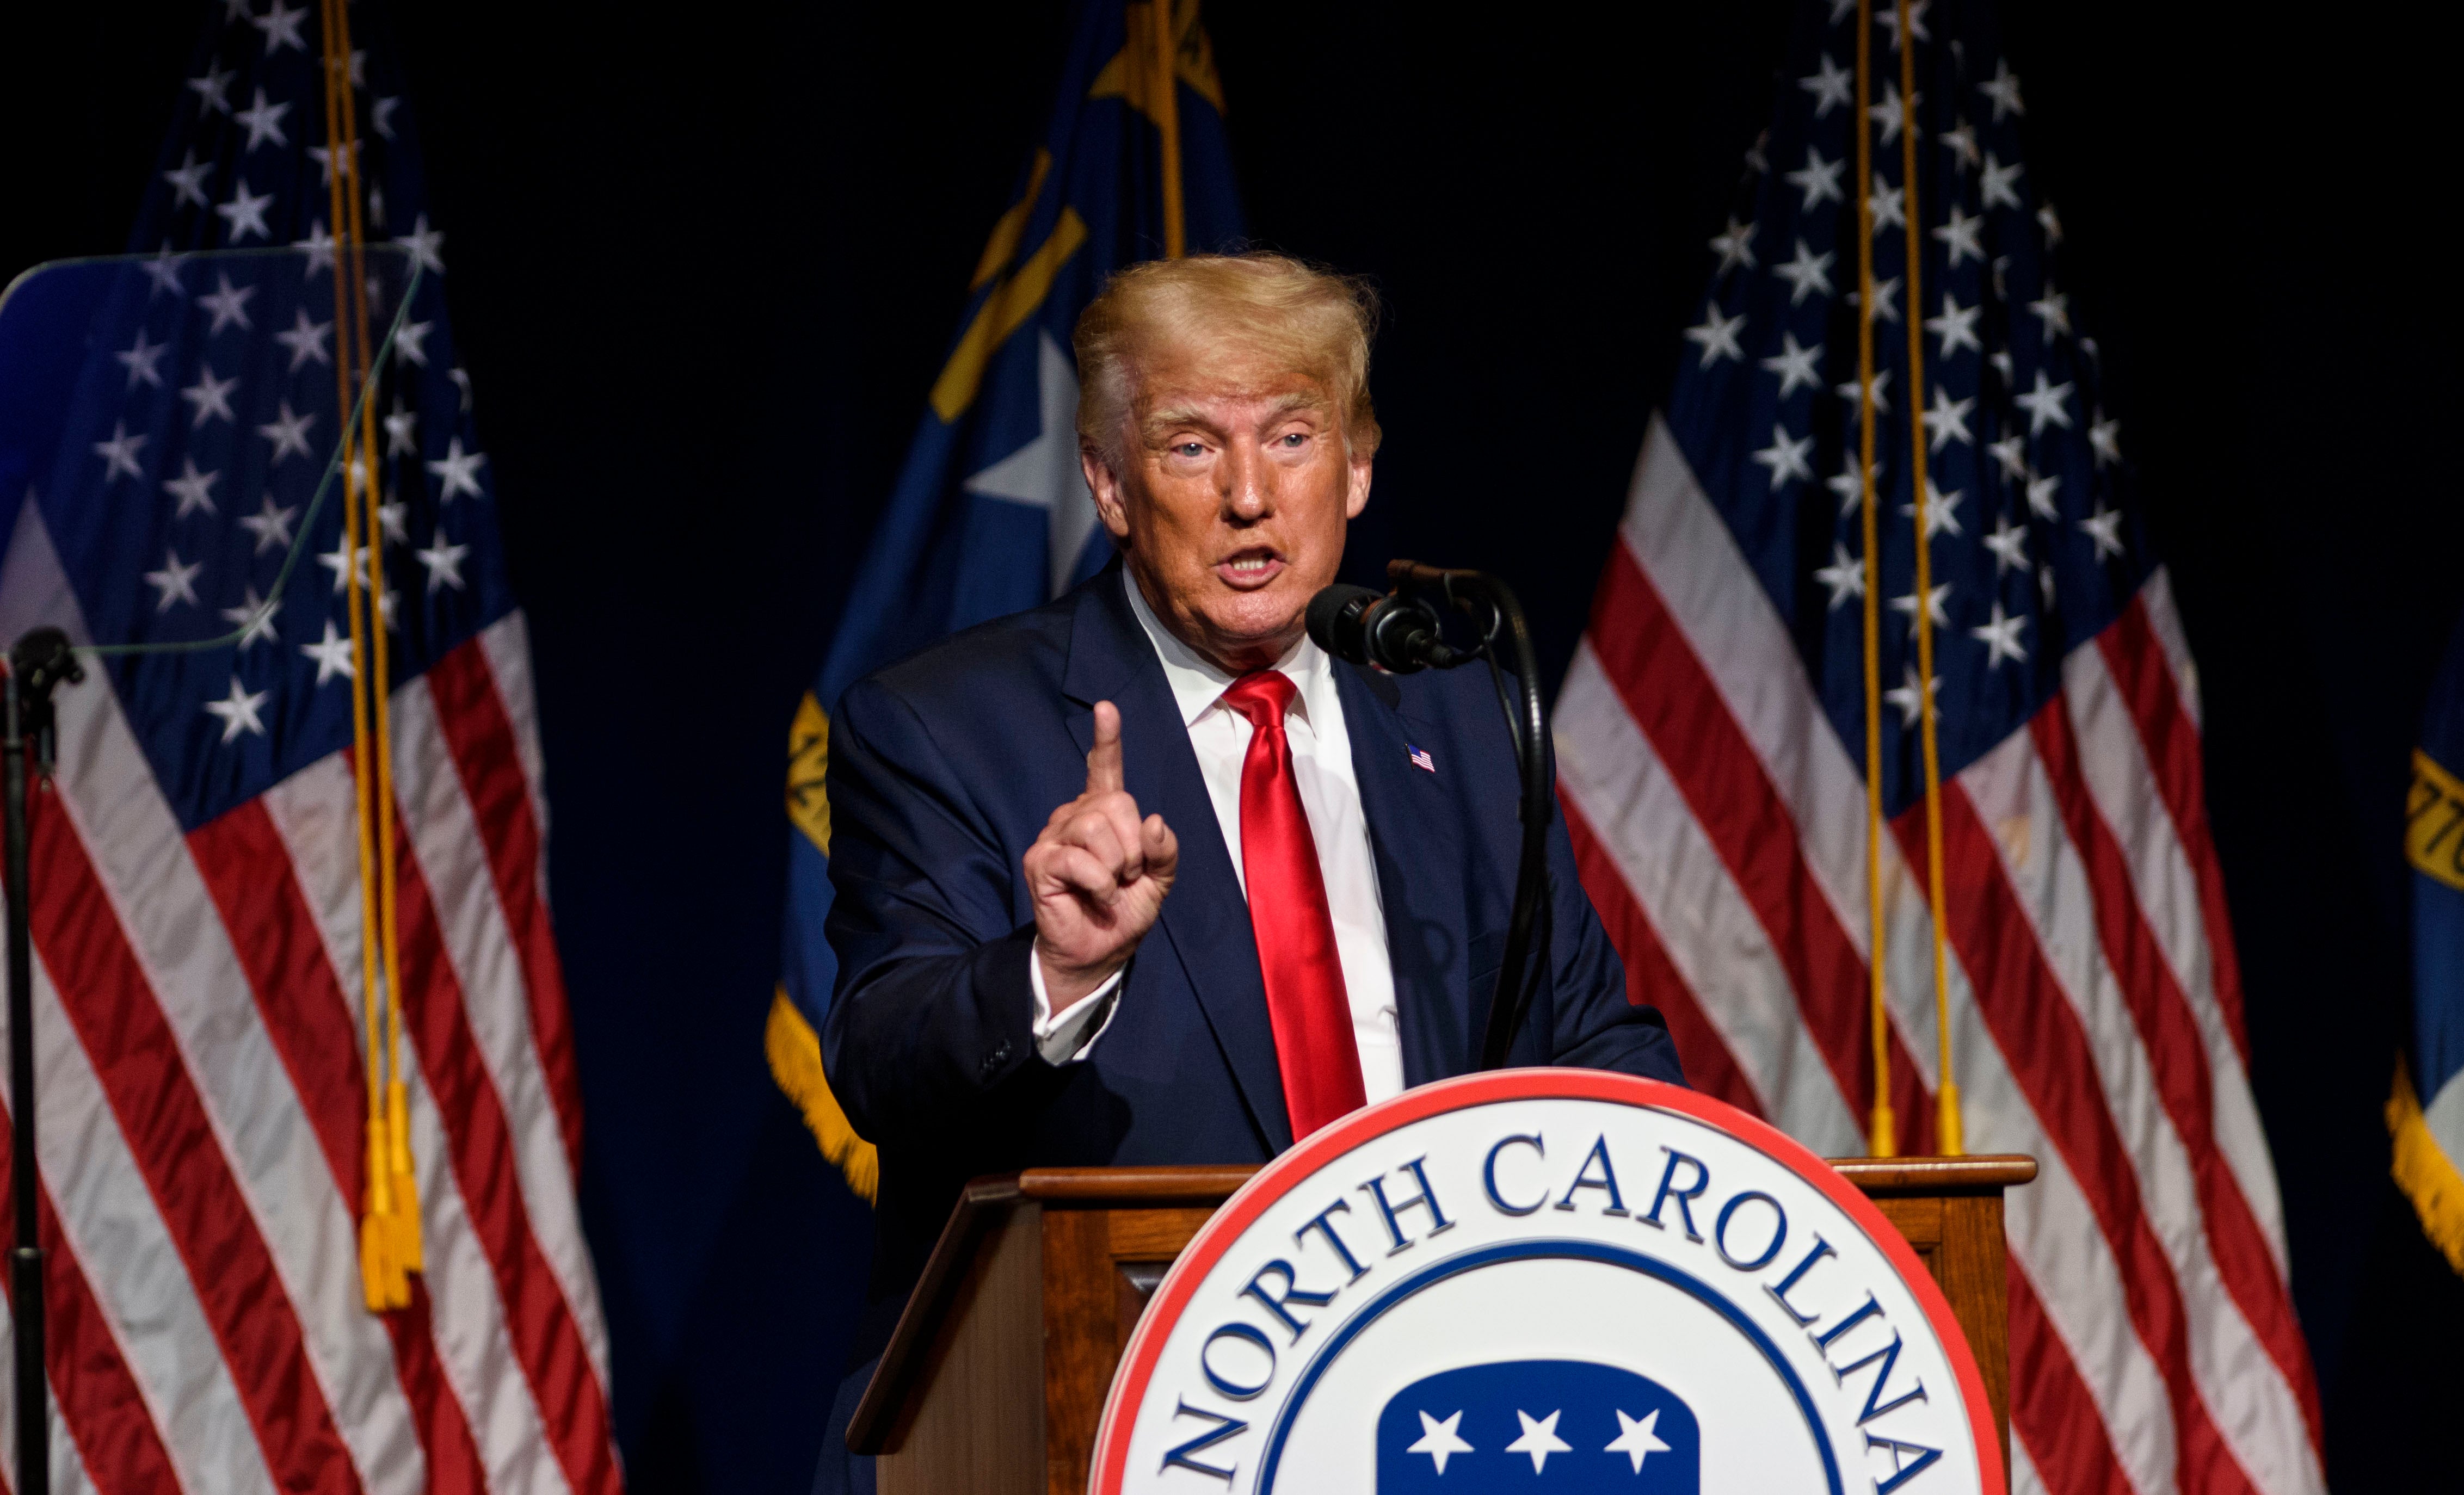 Former US President Donald Trump addresses the NCGOP state convention on June 5, 2021 in Greenville, North Carolina. Mr Trump has sought to claim credit for Vice President Kamala Harris’s plans to visit the US-Mexico border.